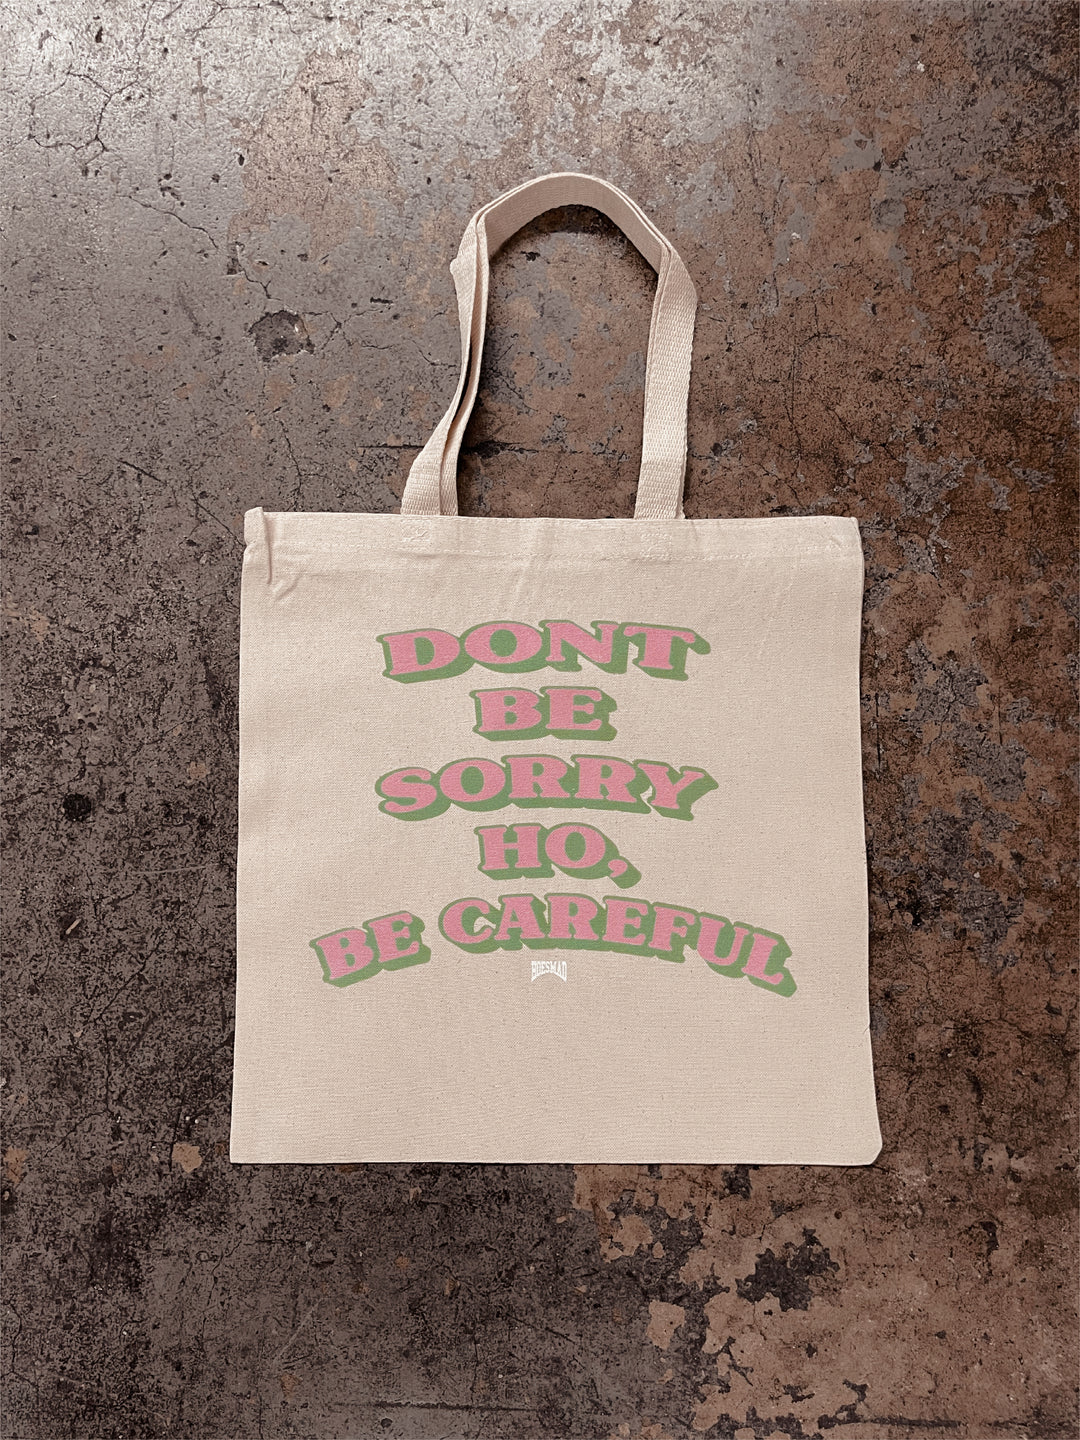 Don't Be Sorry Ho, Be Careful Tote Bag (pink edition)